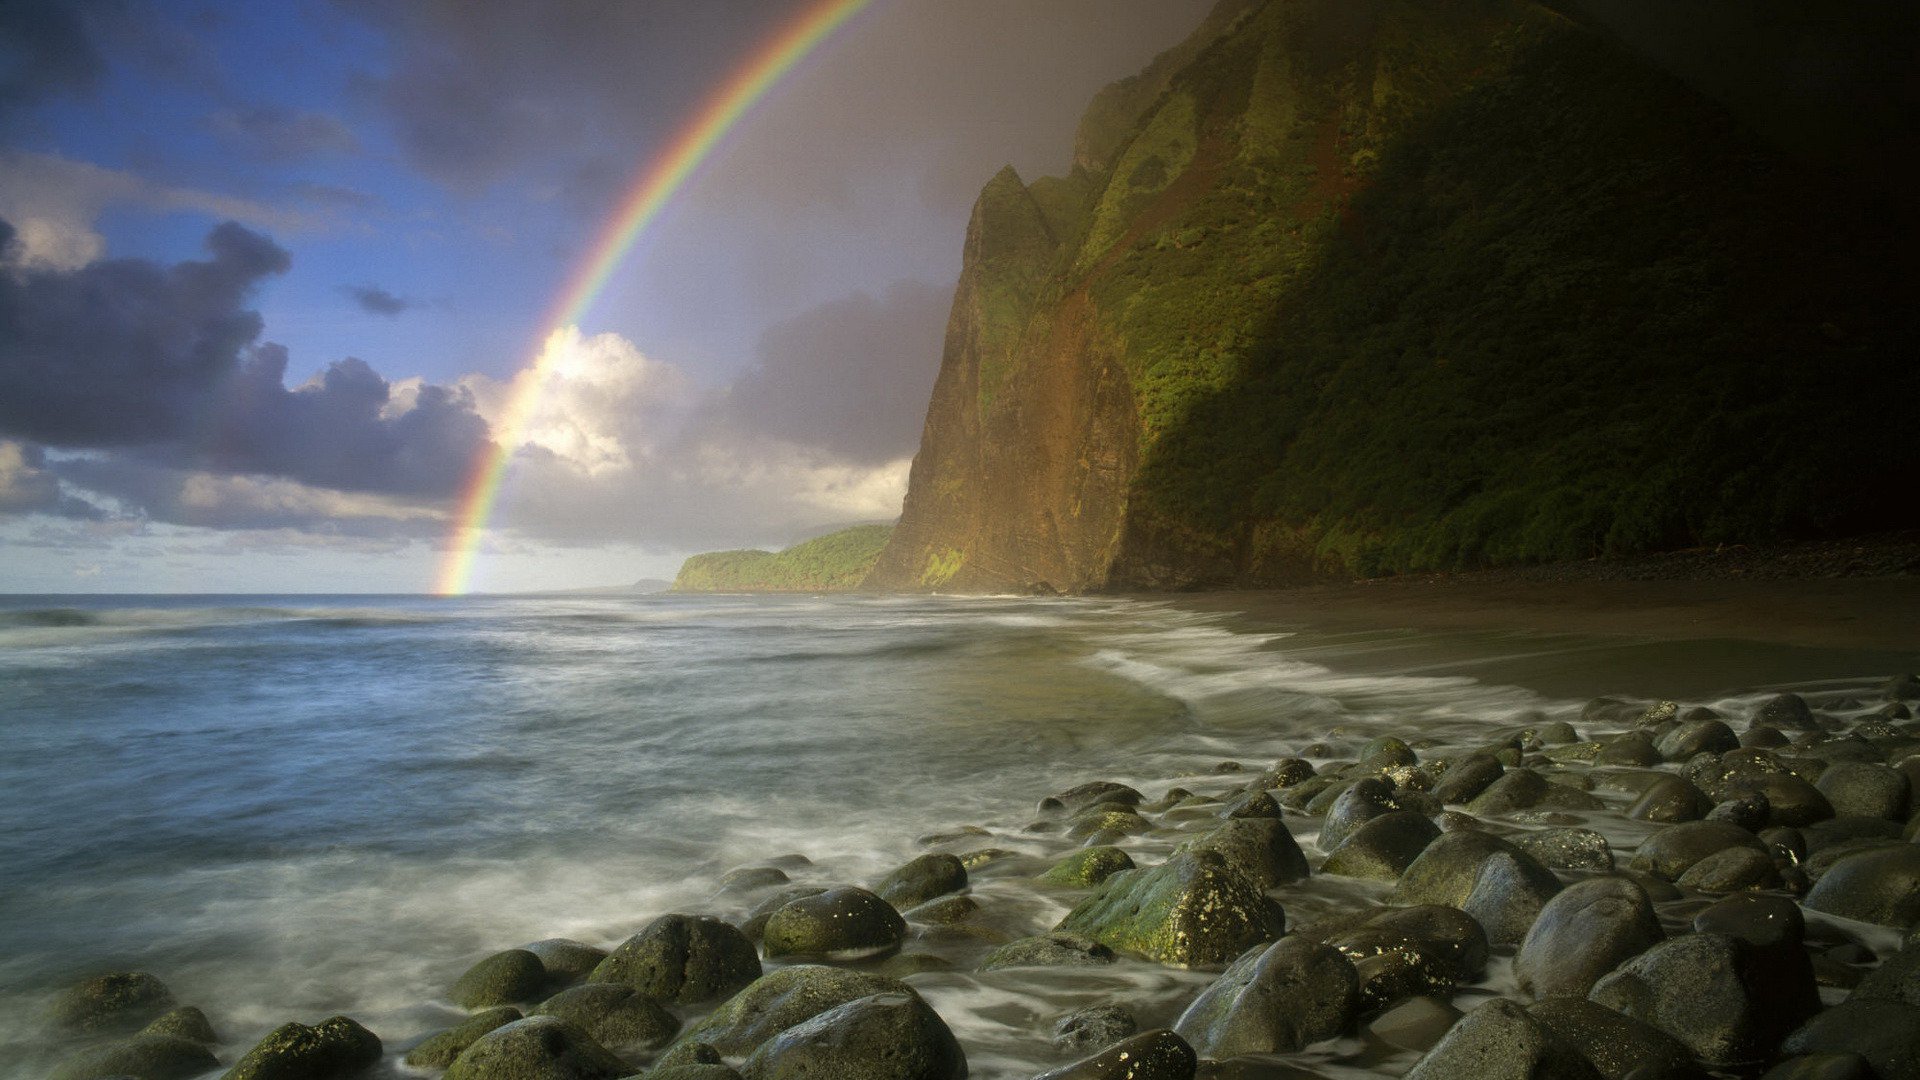 Mauihawaii 4K wallpaper for your desktop or mobile screen free and easy to download